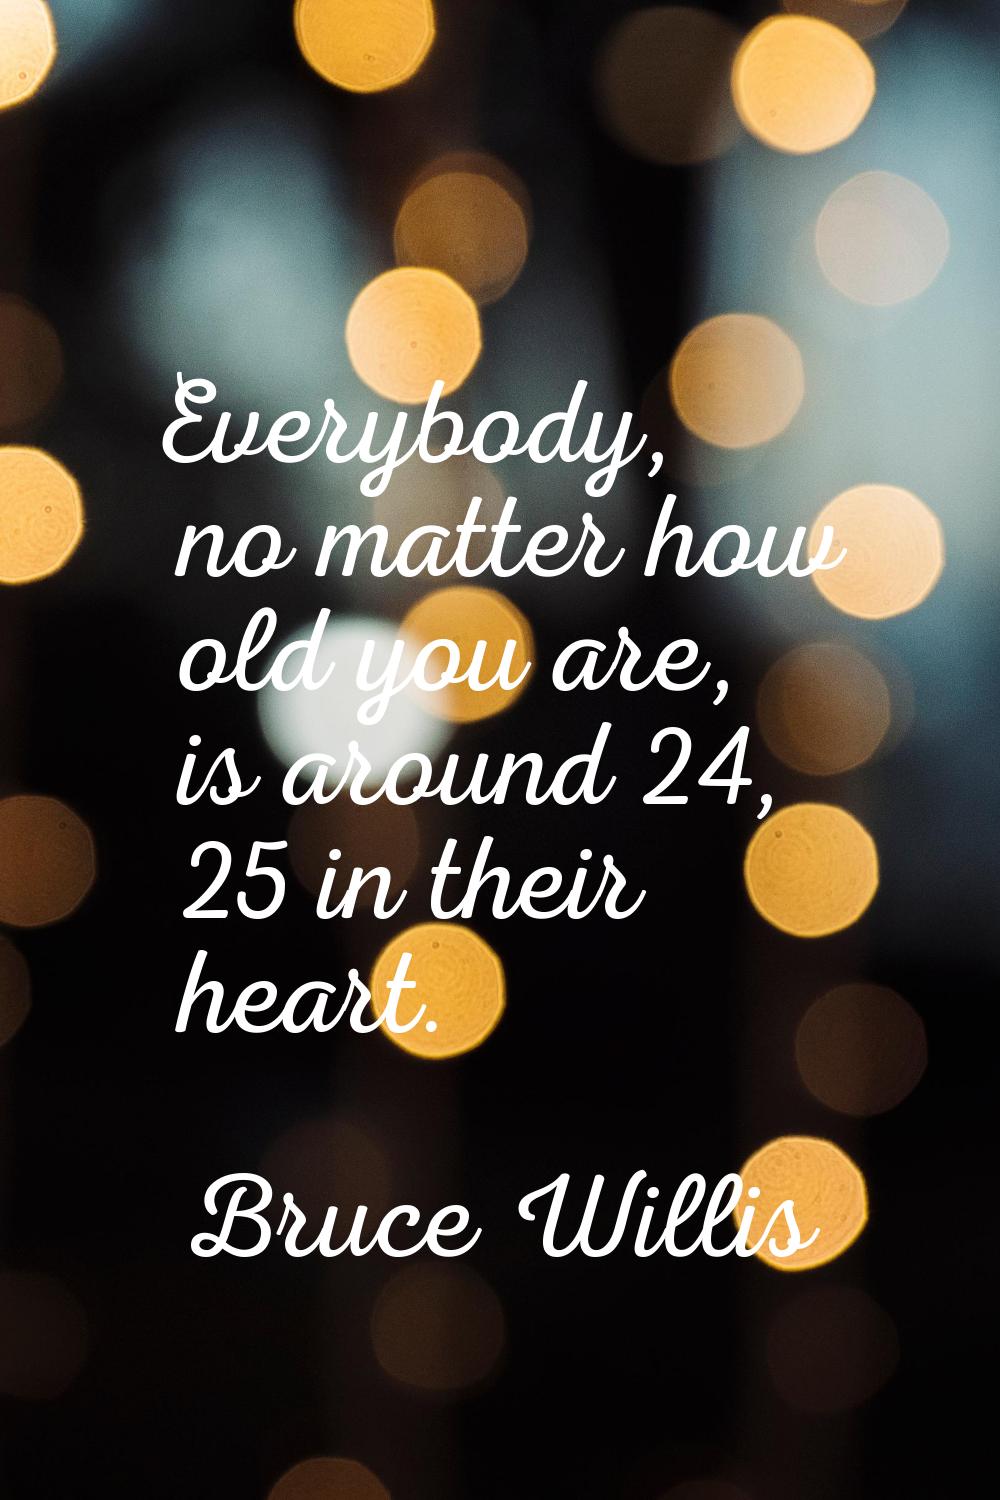 Everybody, no matter how old you are, is around 24, 25 in their heart.